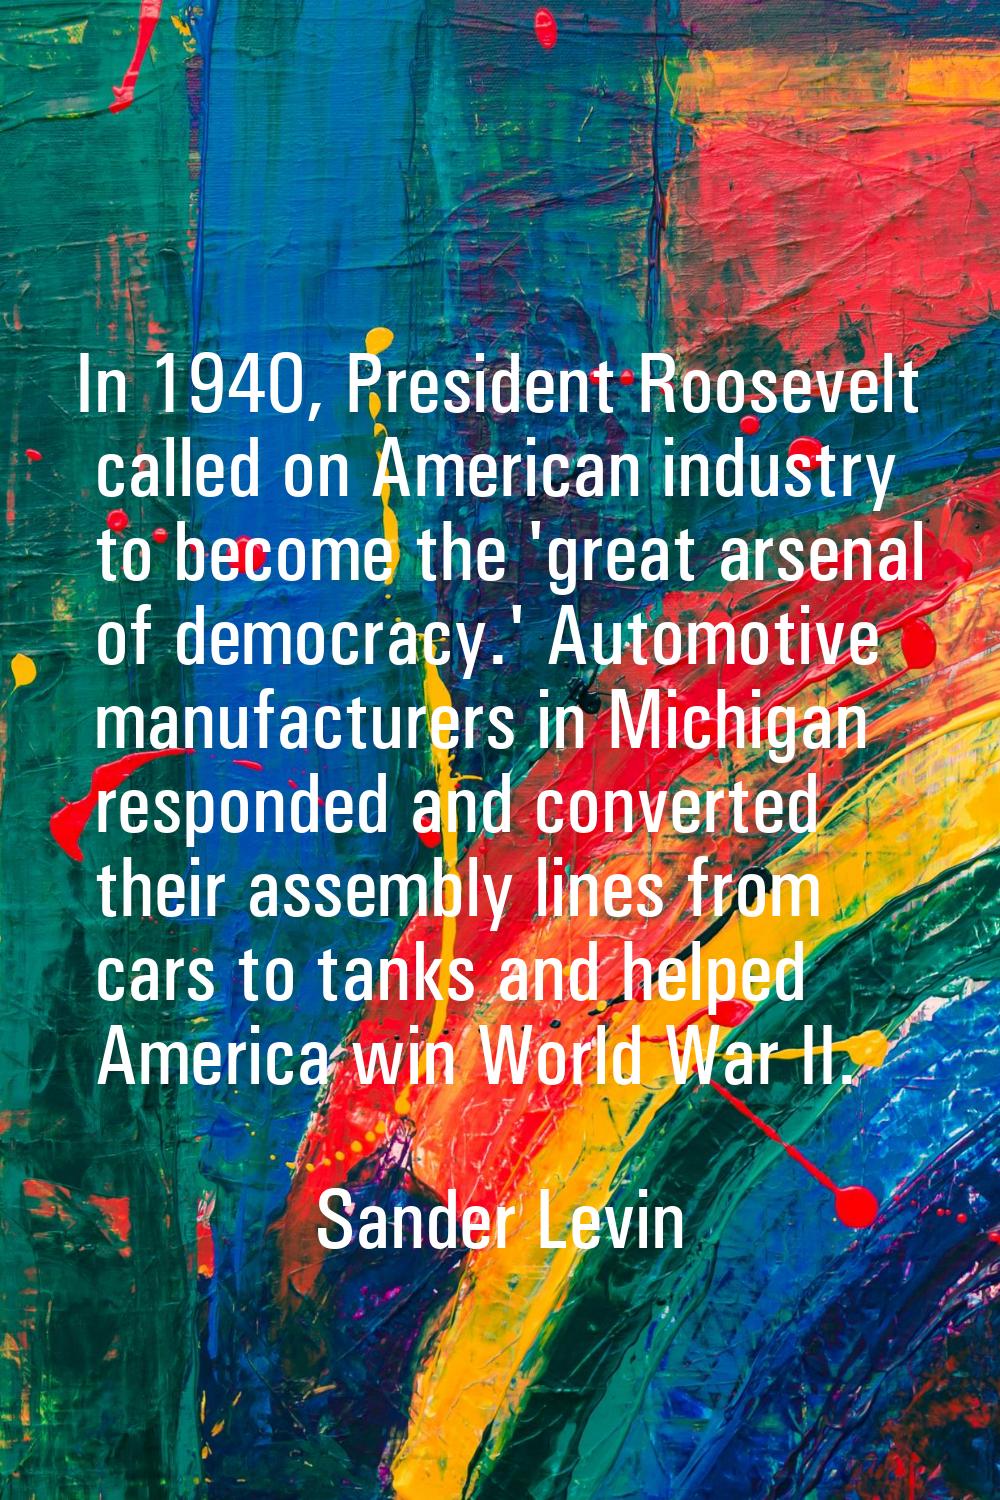 In 1940, President Roosevelt called on American industry to become the 'great arsenal of democracy.